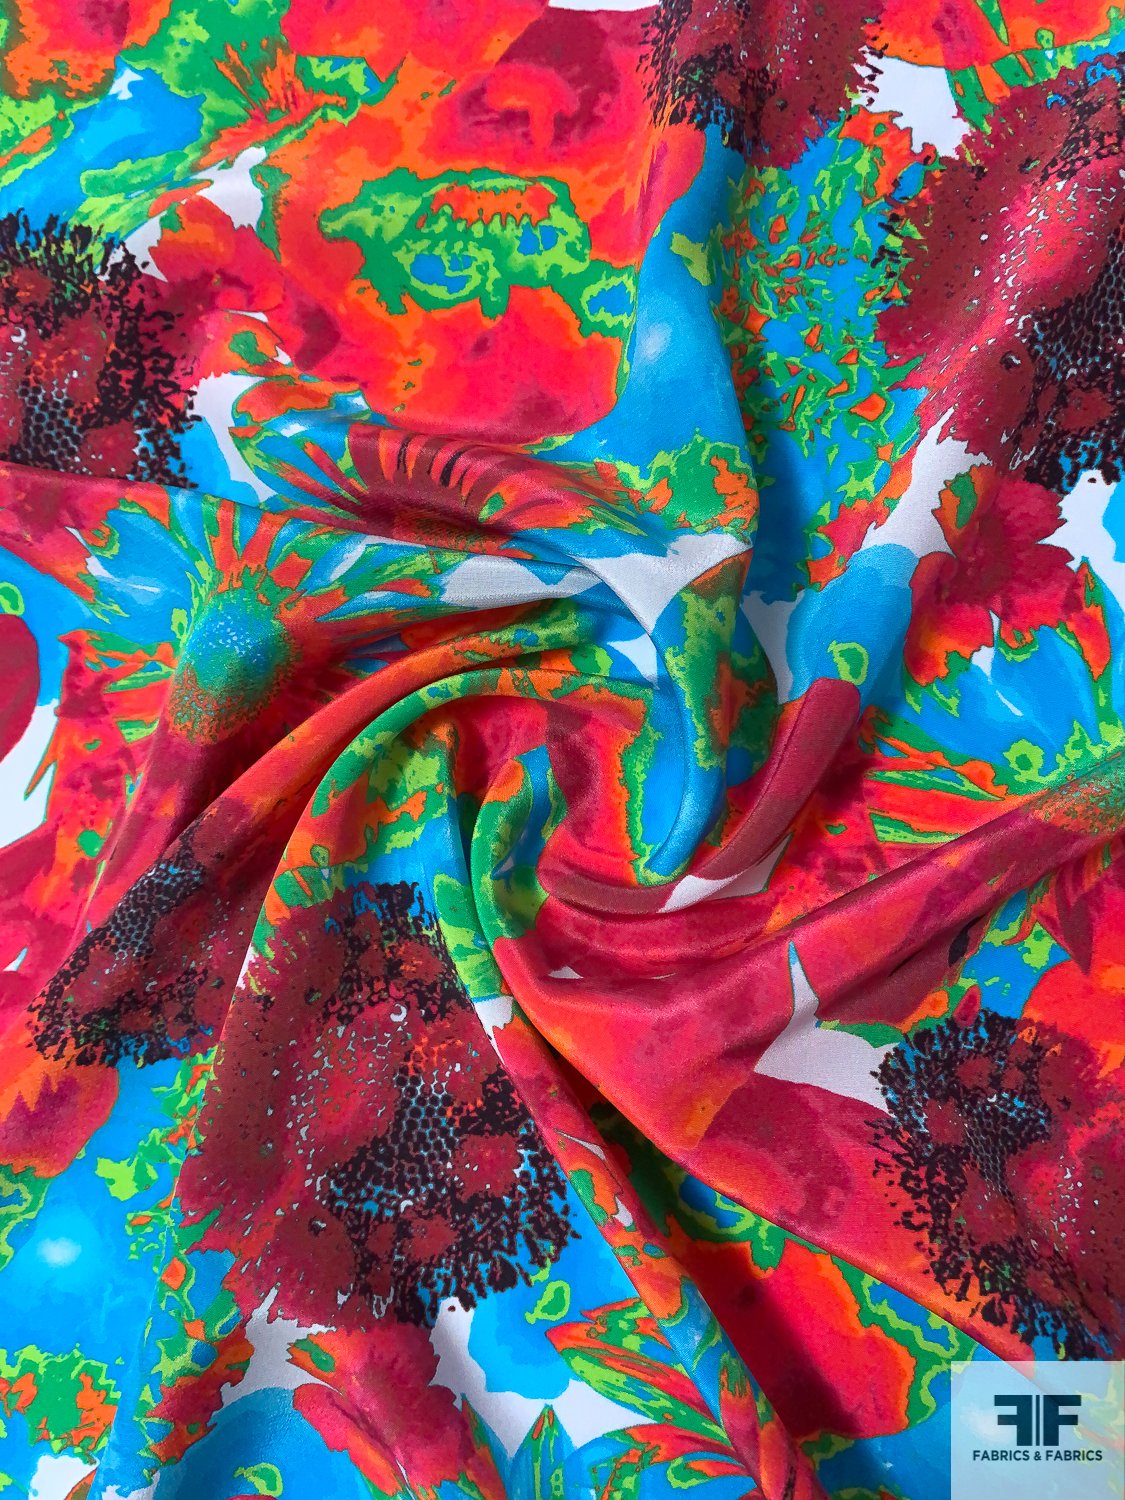 Vibrant Watercolor Floral Printed Silk Crepe de Chine - Reds / Turquoise Blue / Greens